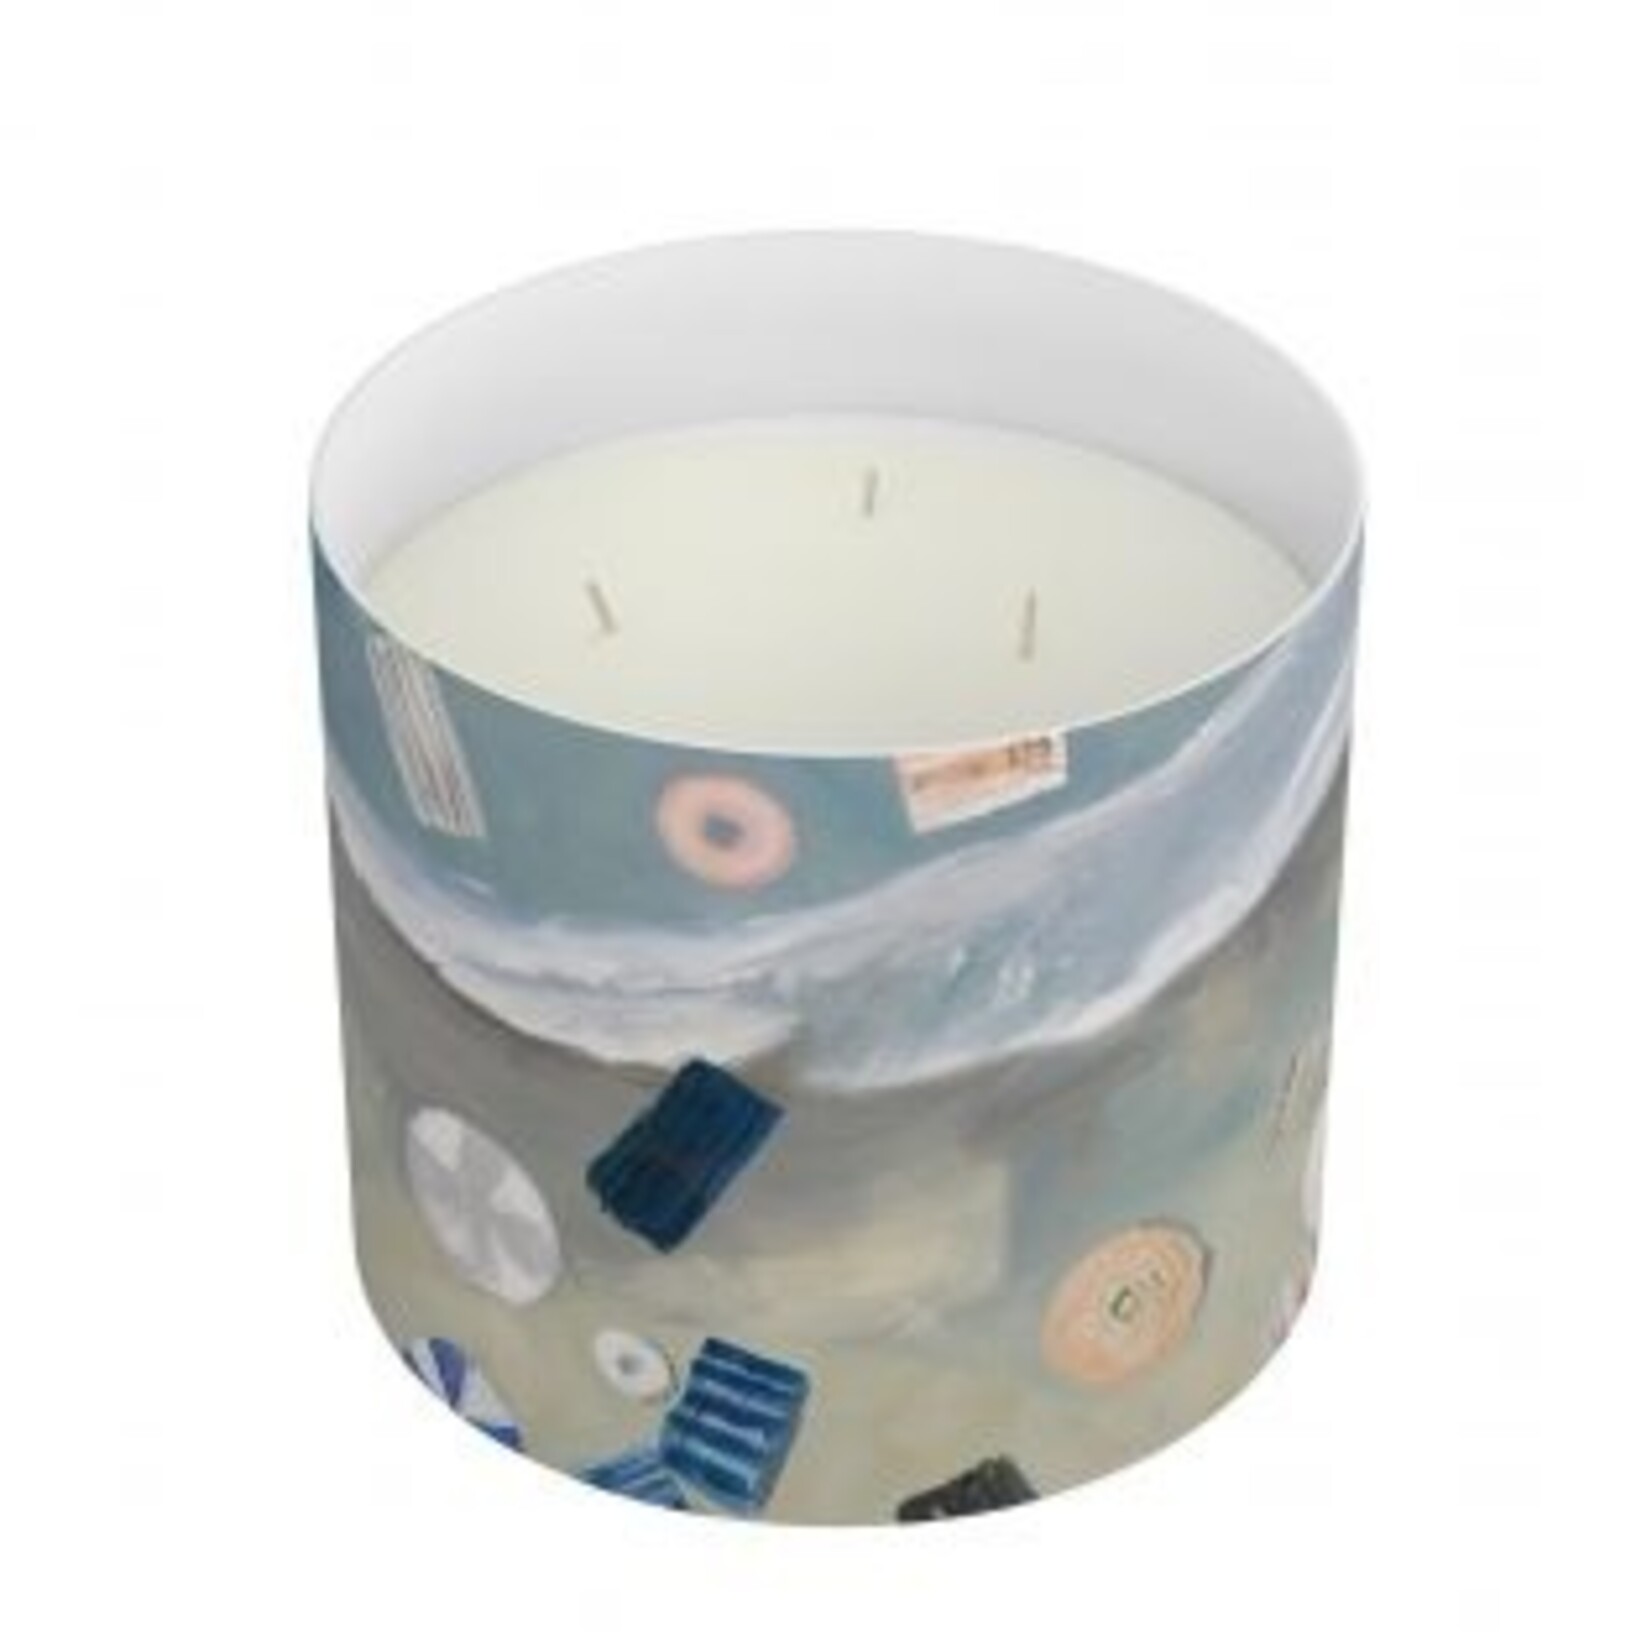 Annapolis Candle -Kim Hovell  3 Wick - Beach Haven